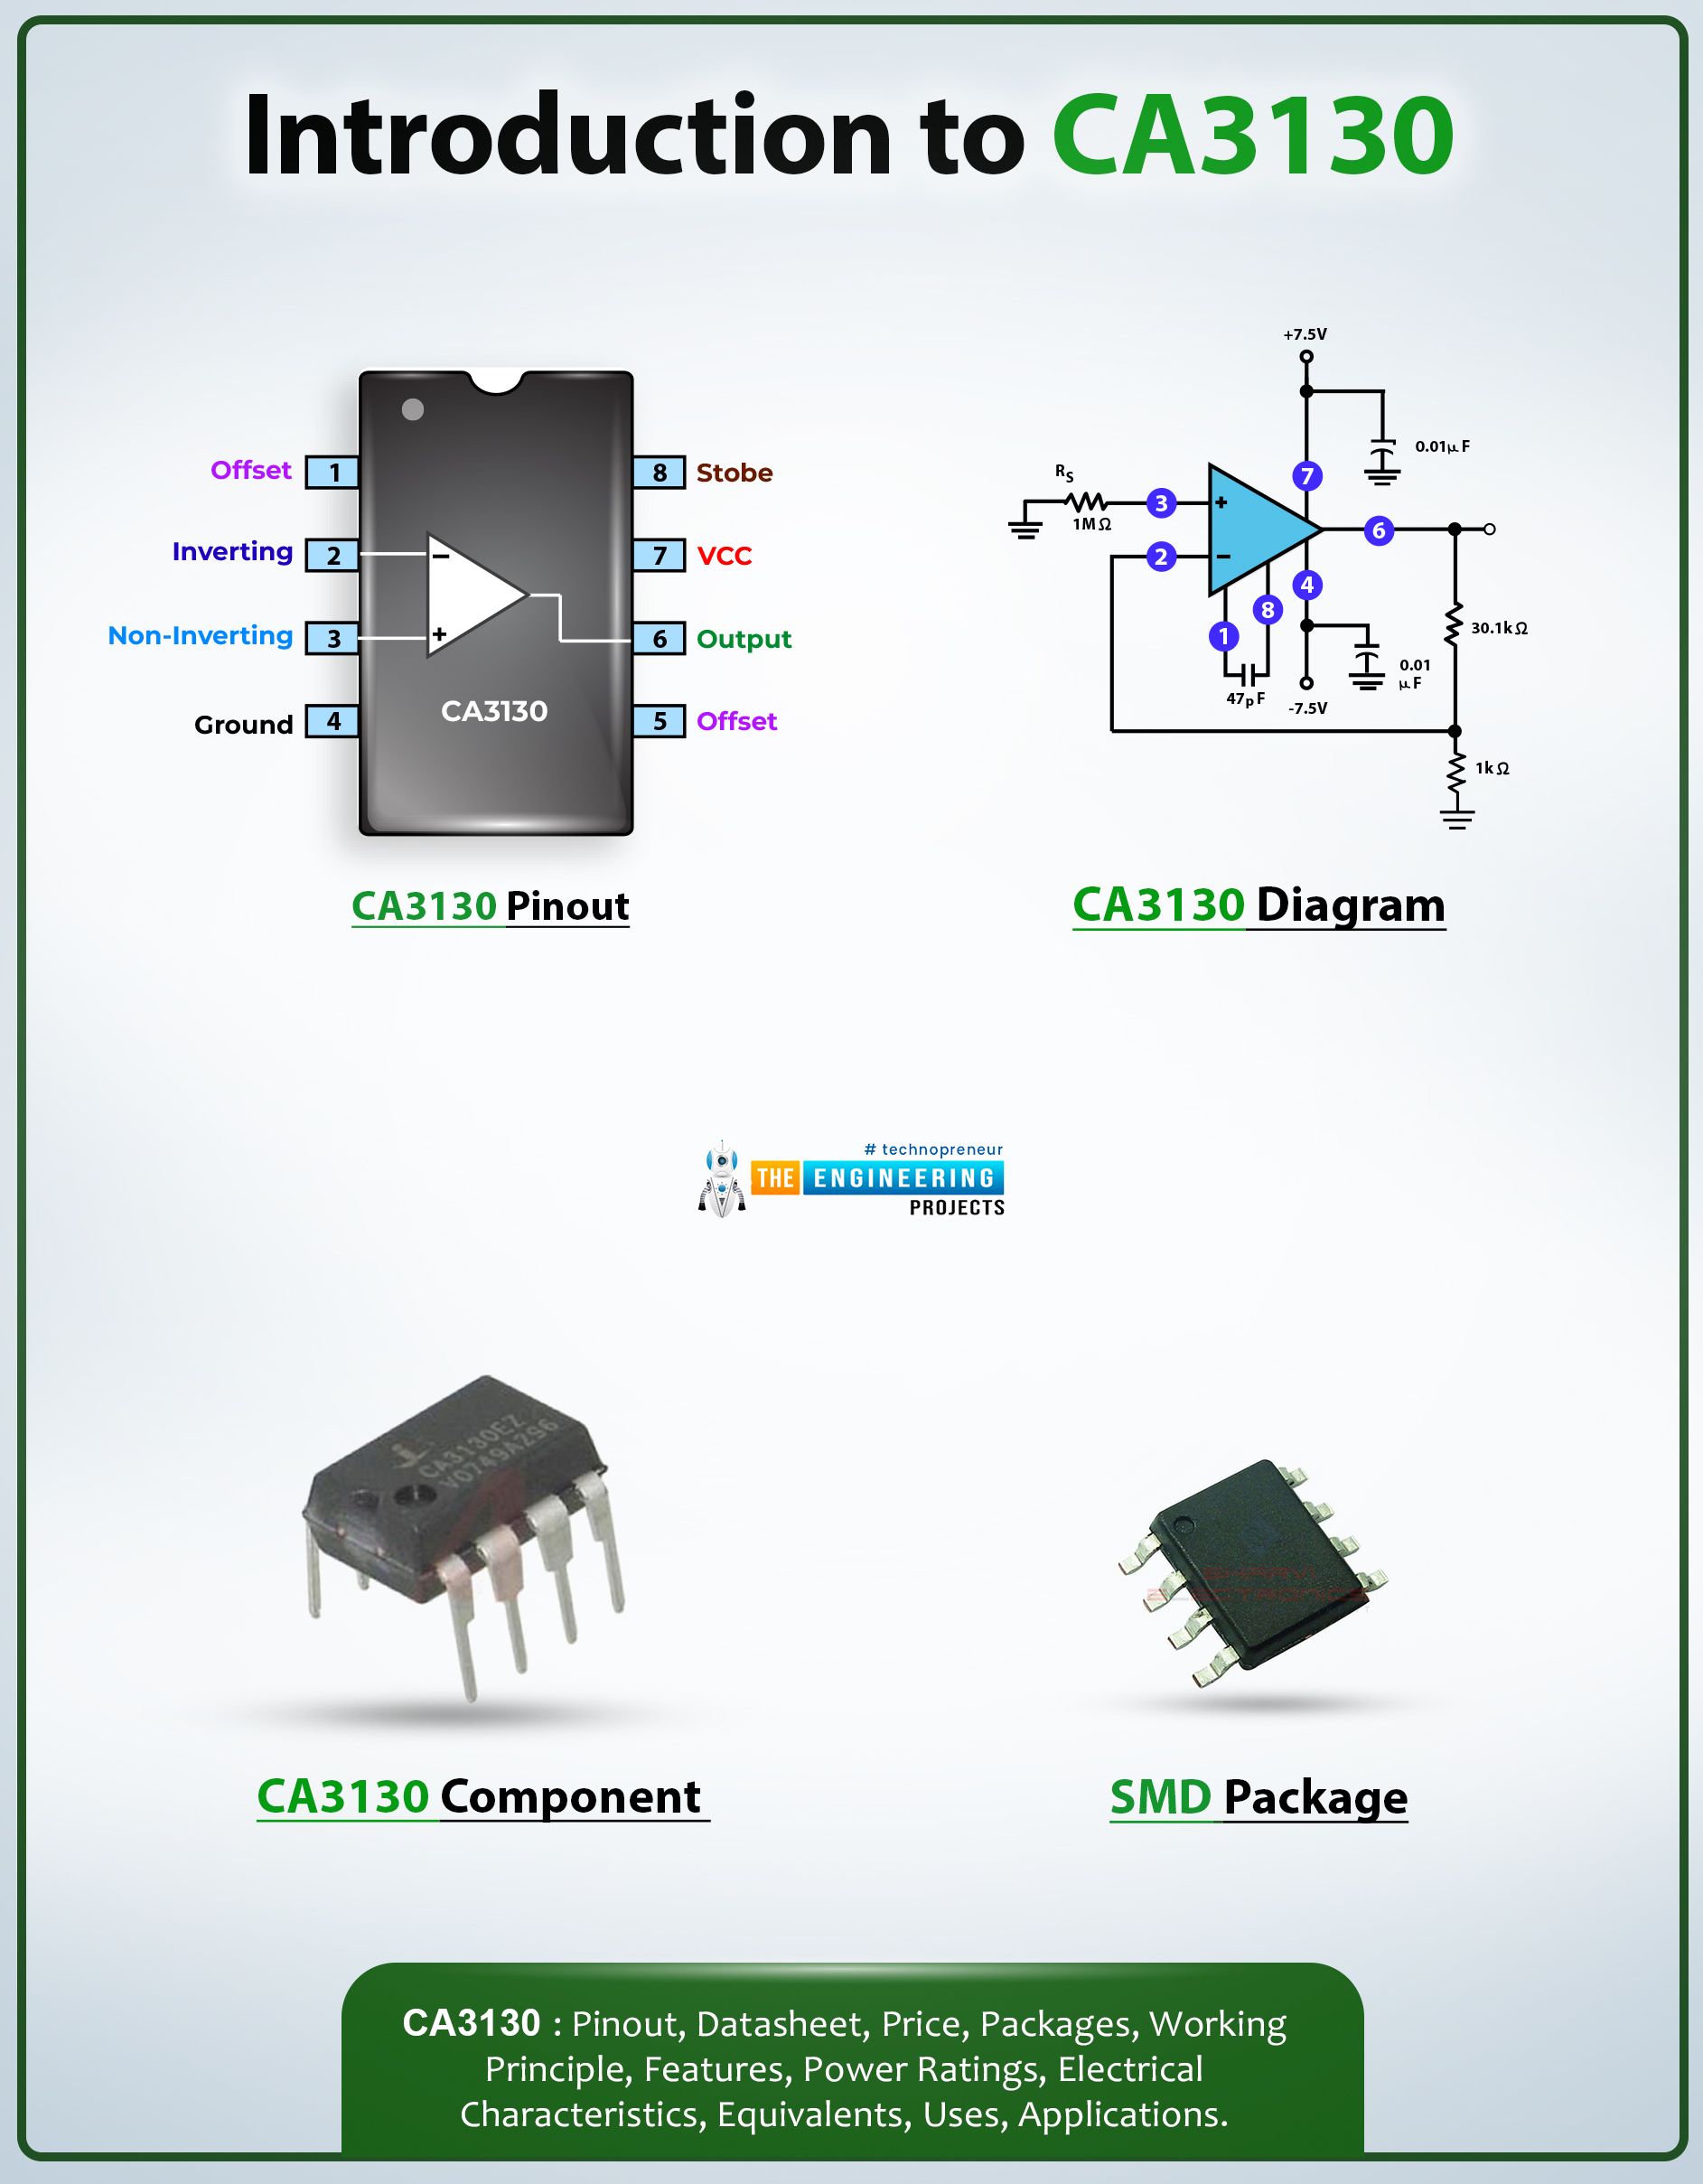 Introduction to ca3130, ca3130 pinout, ca3130 power ratings, ca3130 applications